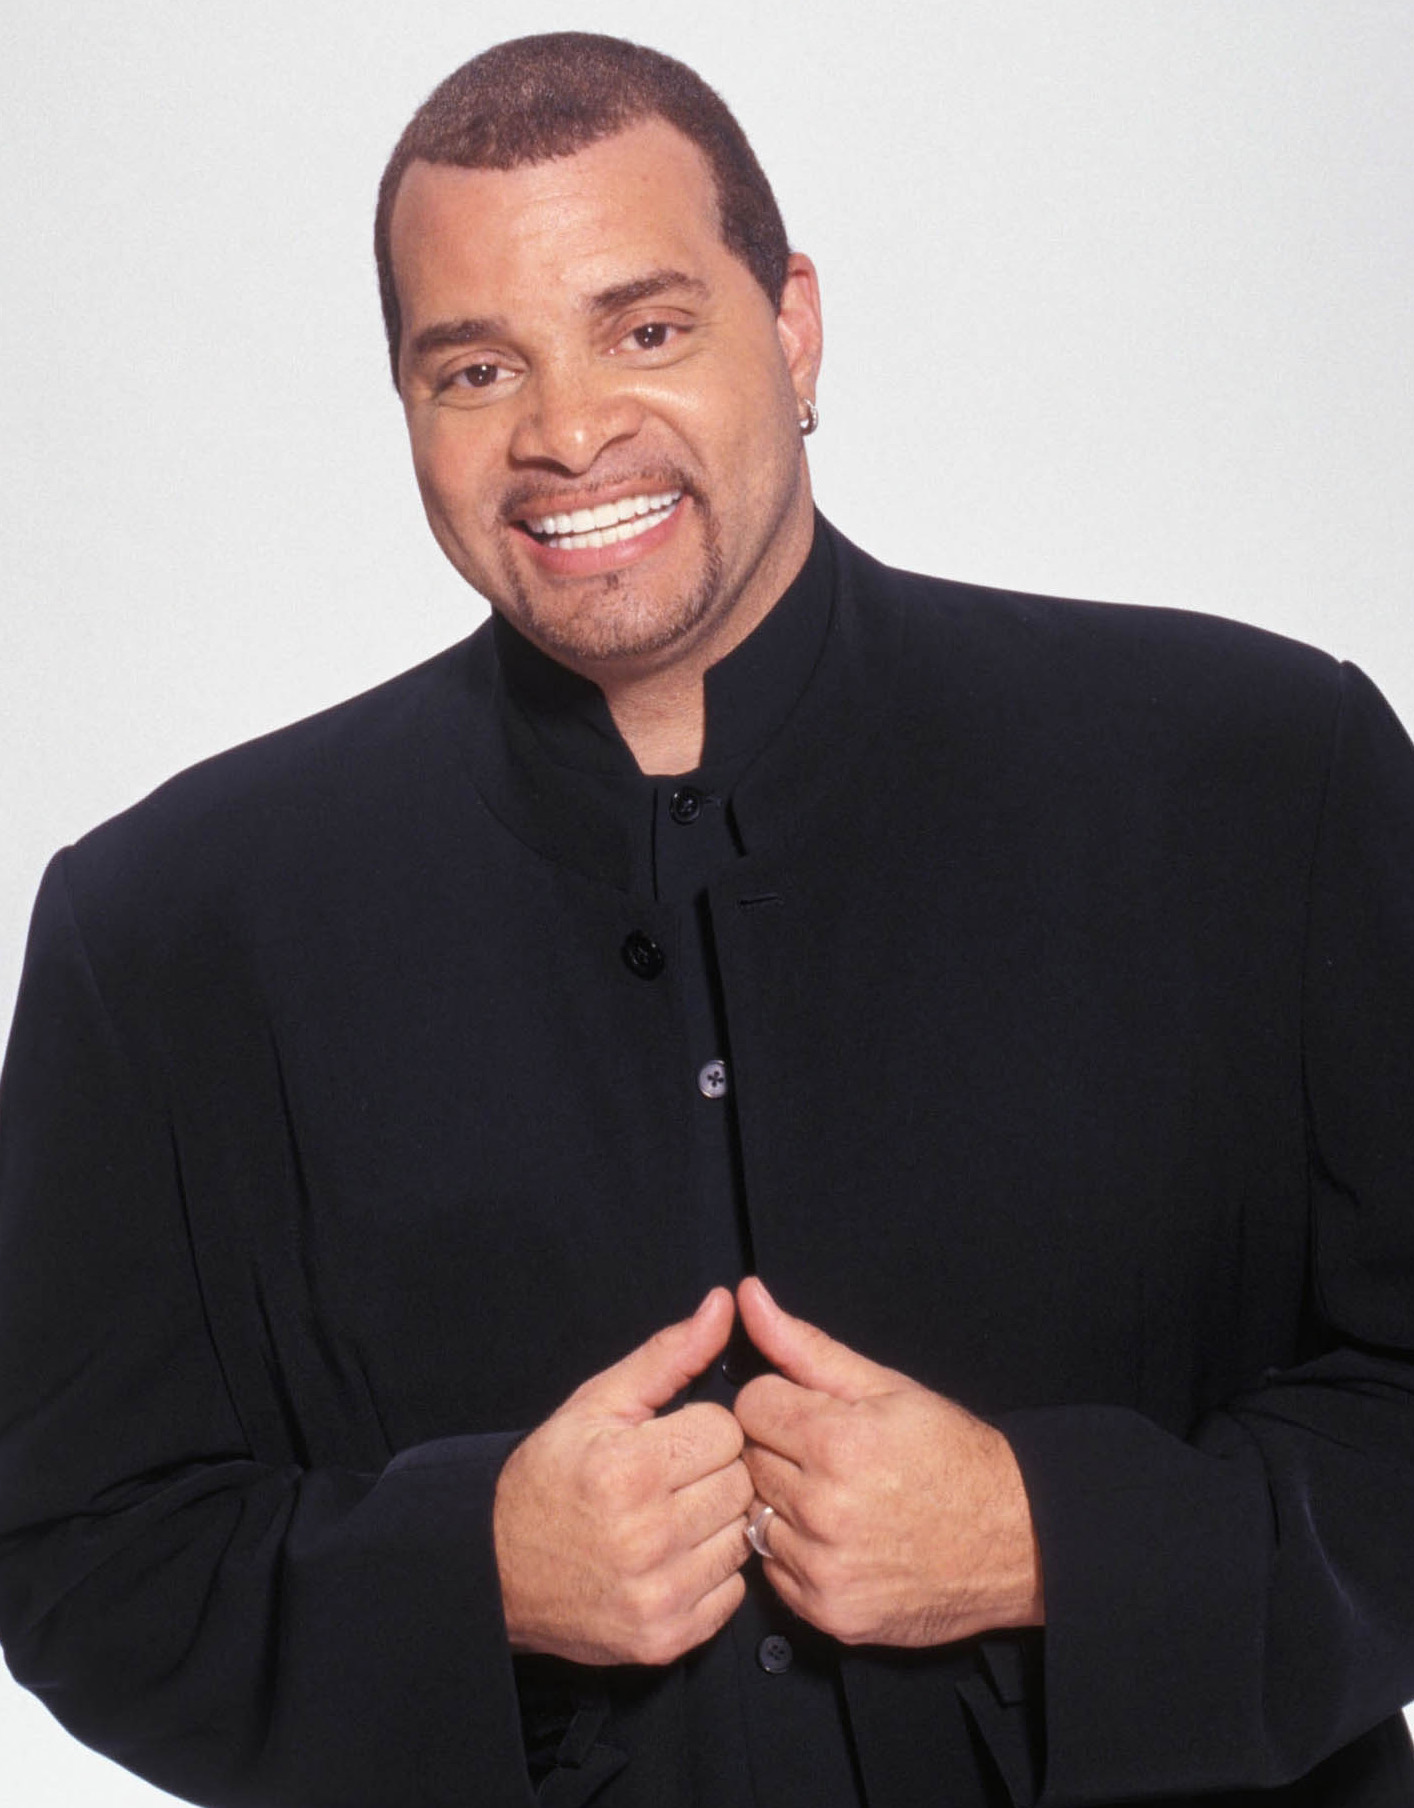 Sinbad is a featured comic at the 2015 Hot 97 April Fools Comedy Show at the Theater at Madison Square Garden, Wed., April 1 at 8pm.